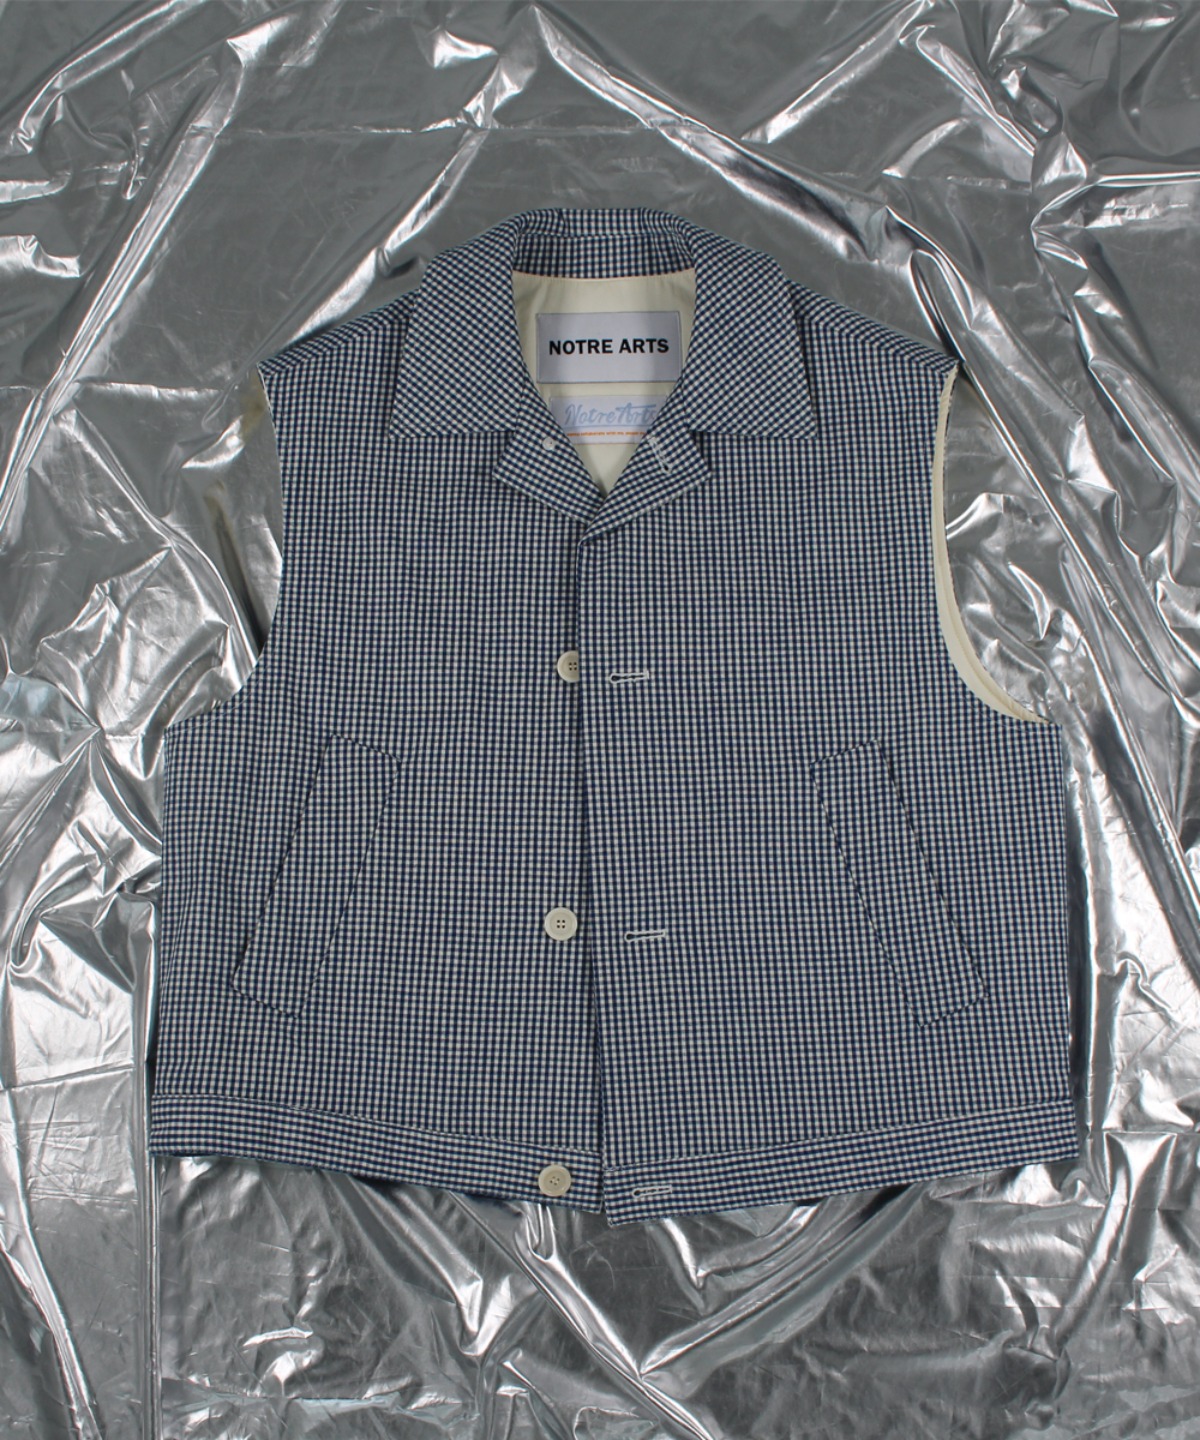 Notrearts노트르아트스 Gingham Check Padded Vest